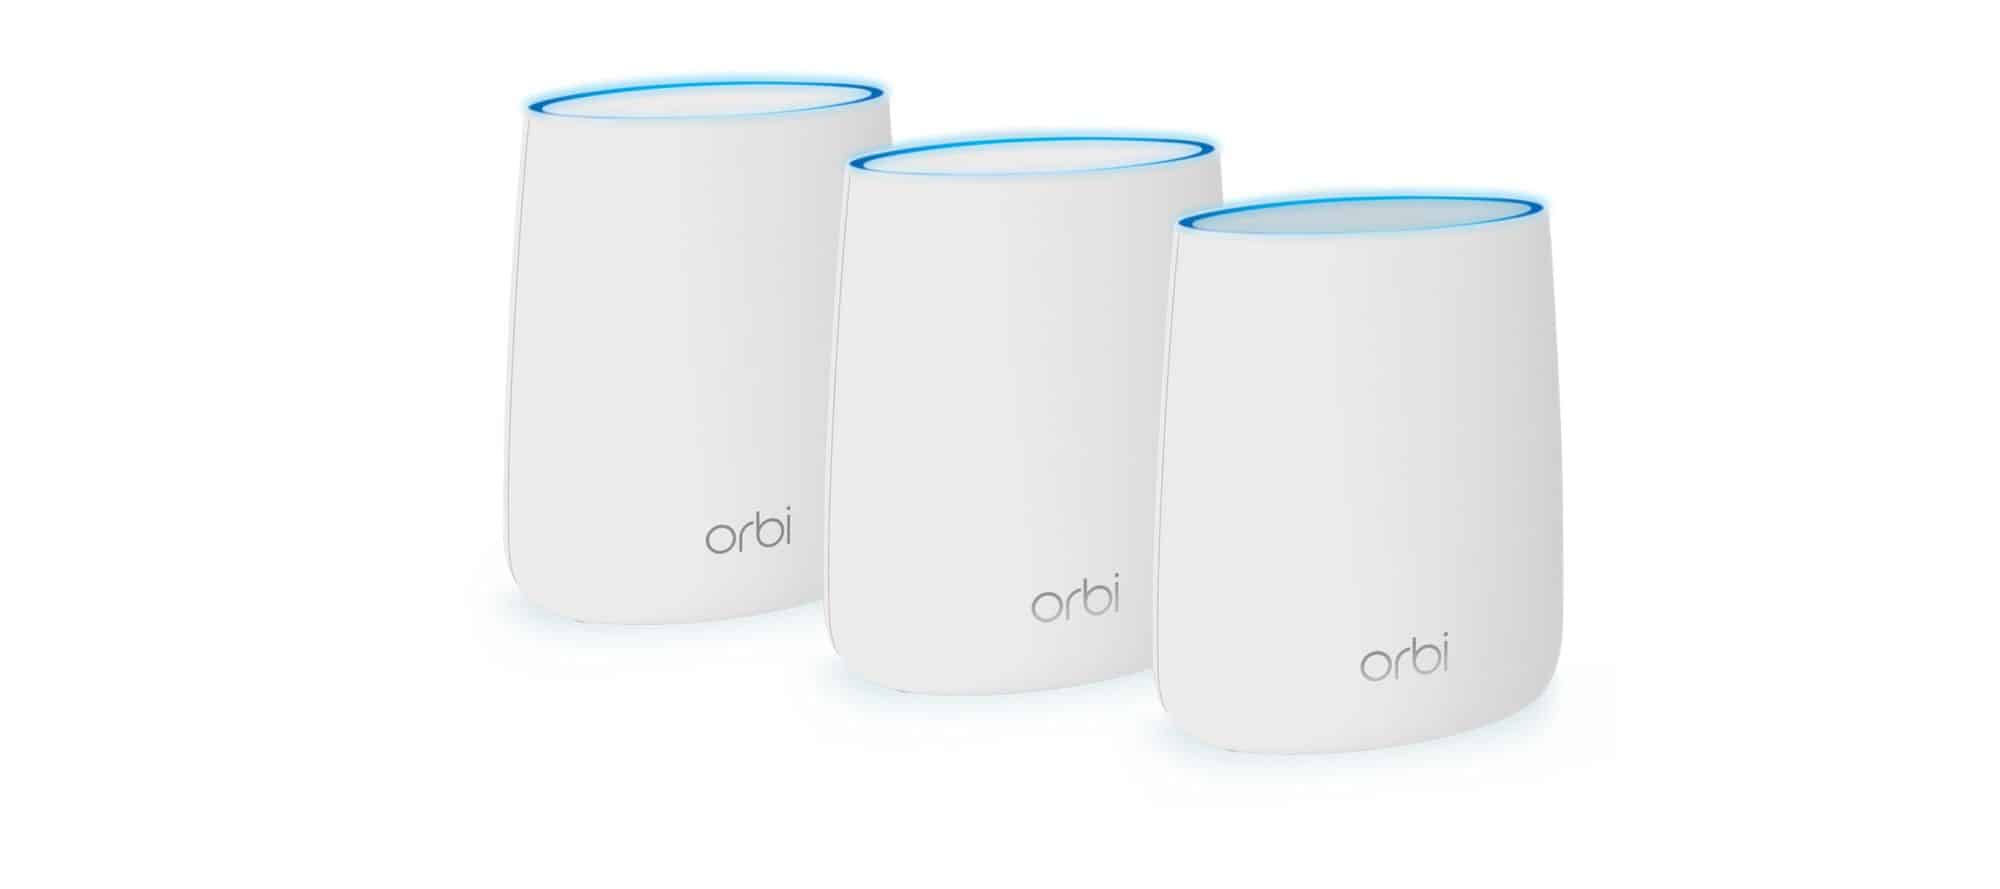 5 Best WiFi Mesh Network Routers for Your Home and Office